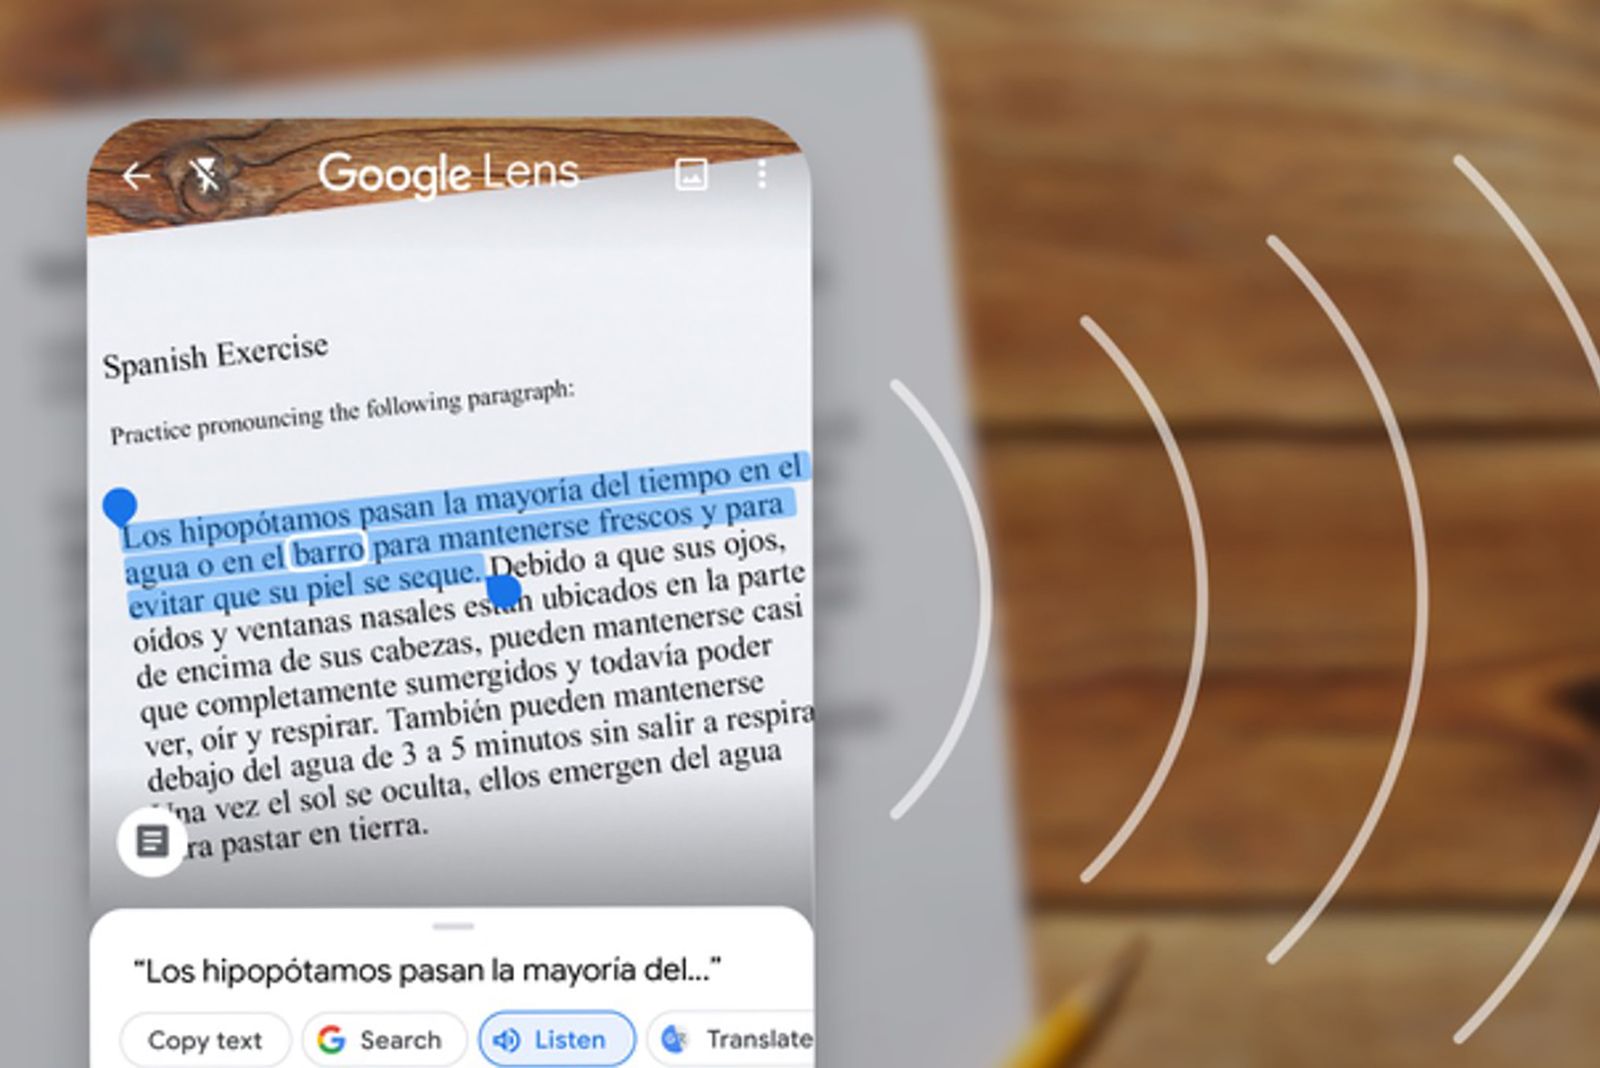 New Google Lens update How to copy notes to computer and listen to words image 1